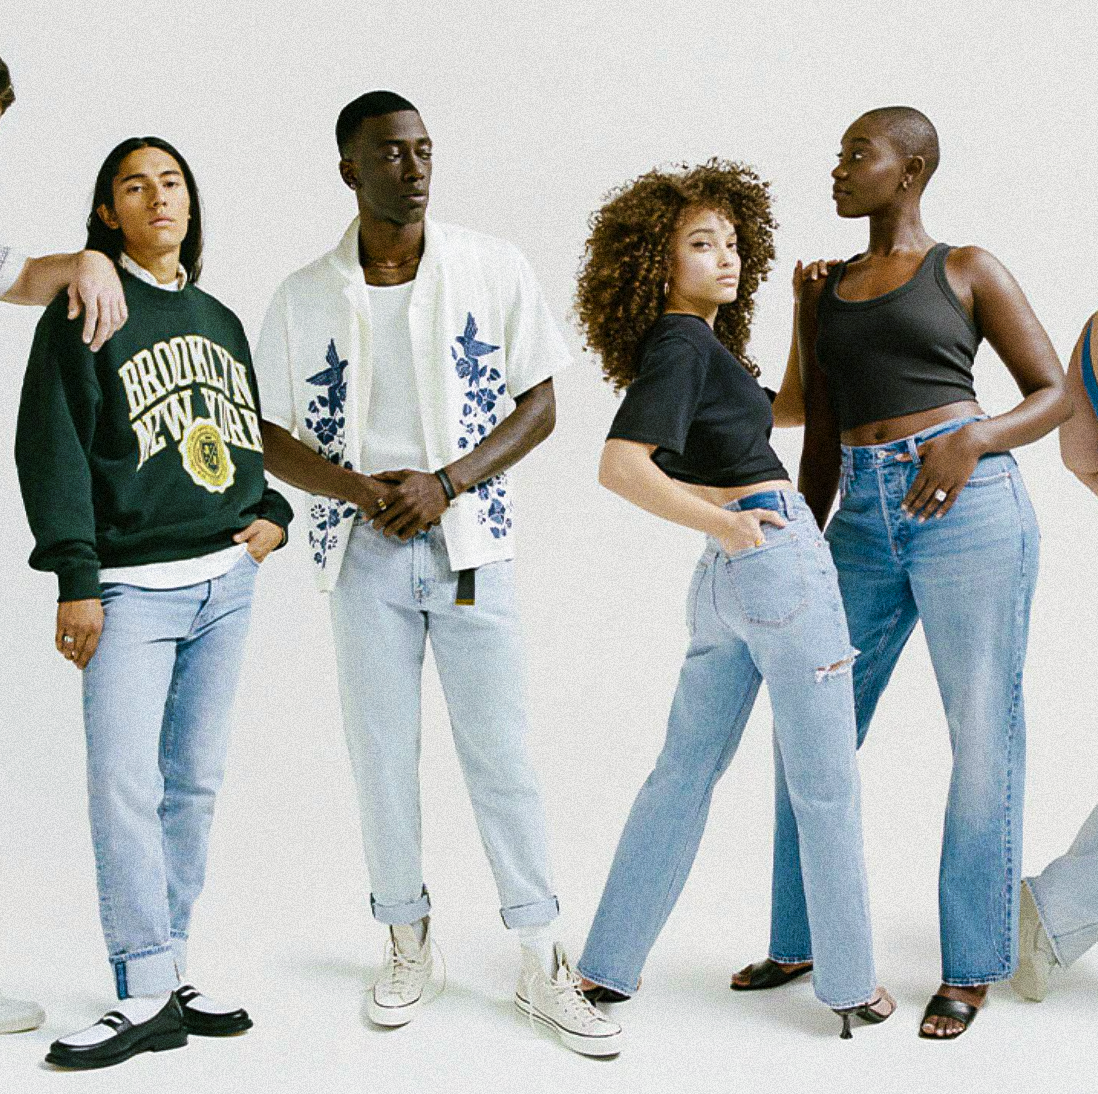 Get These TikTok-Approved Abercrombie Jeans While They're 30% Off